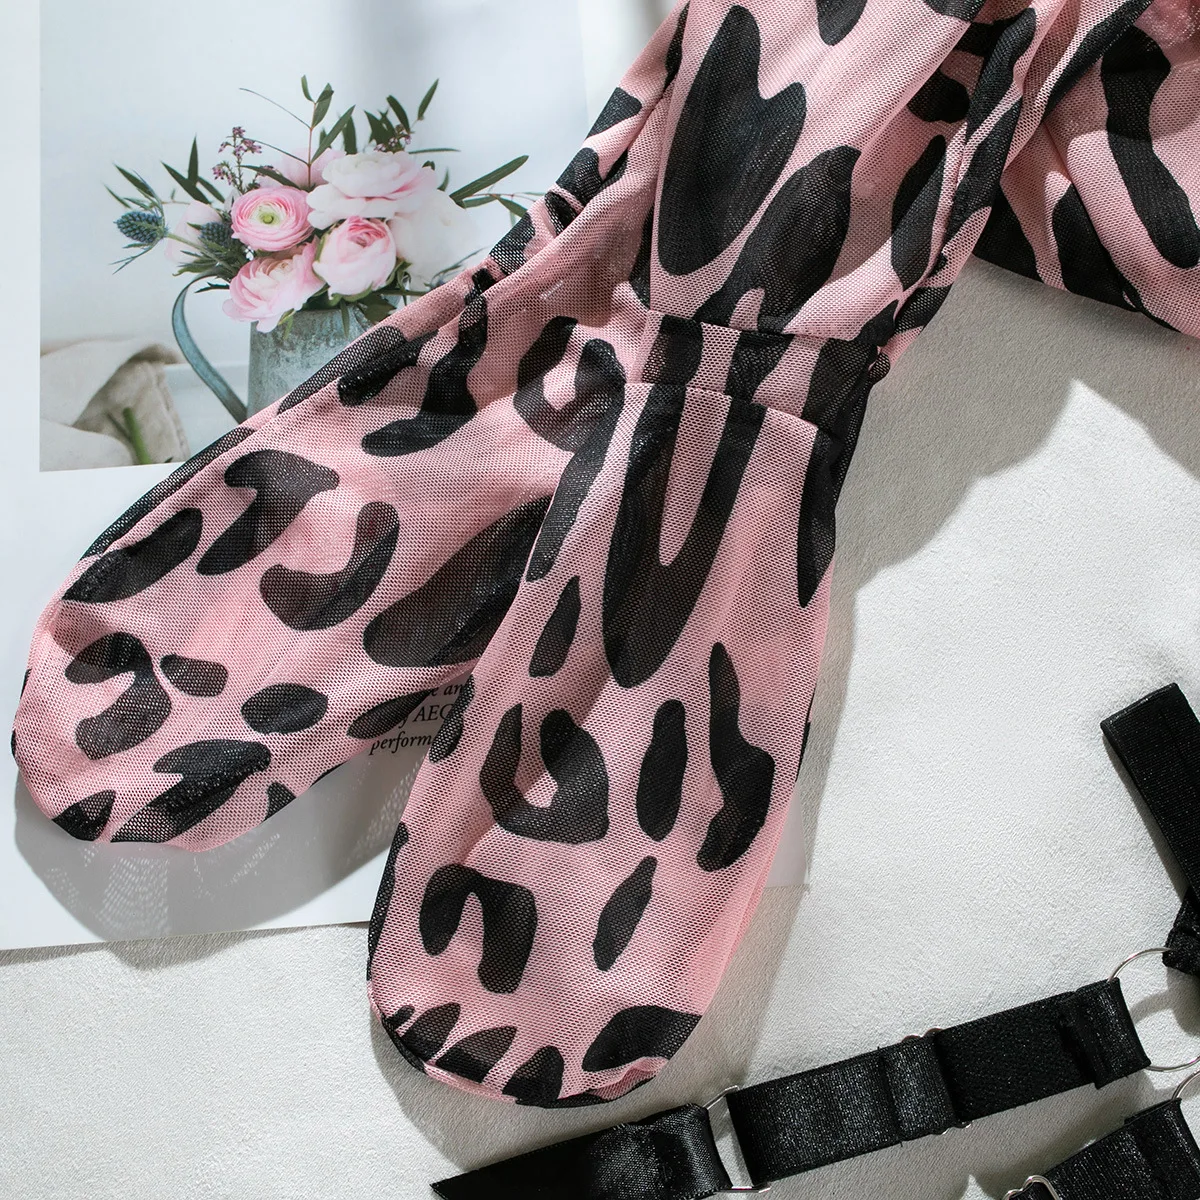 Wild Animal - Leopard Lingerie set with Stockings